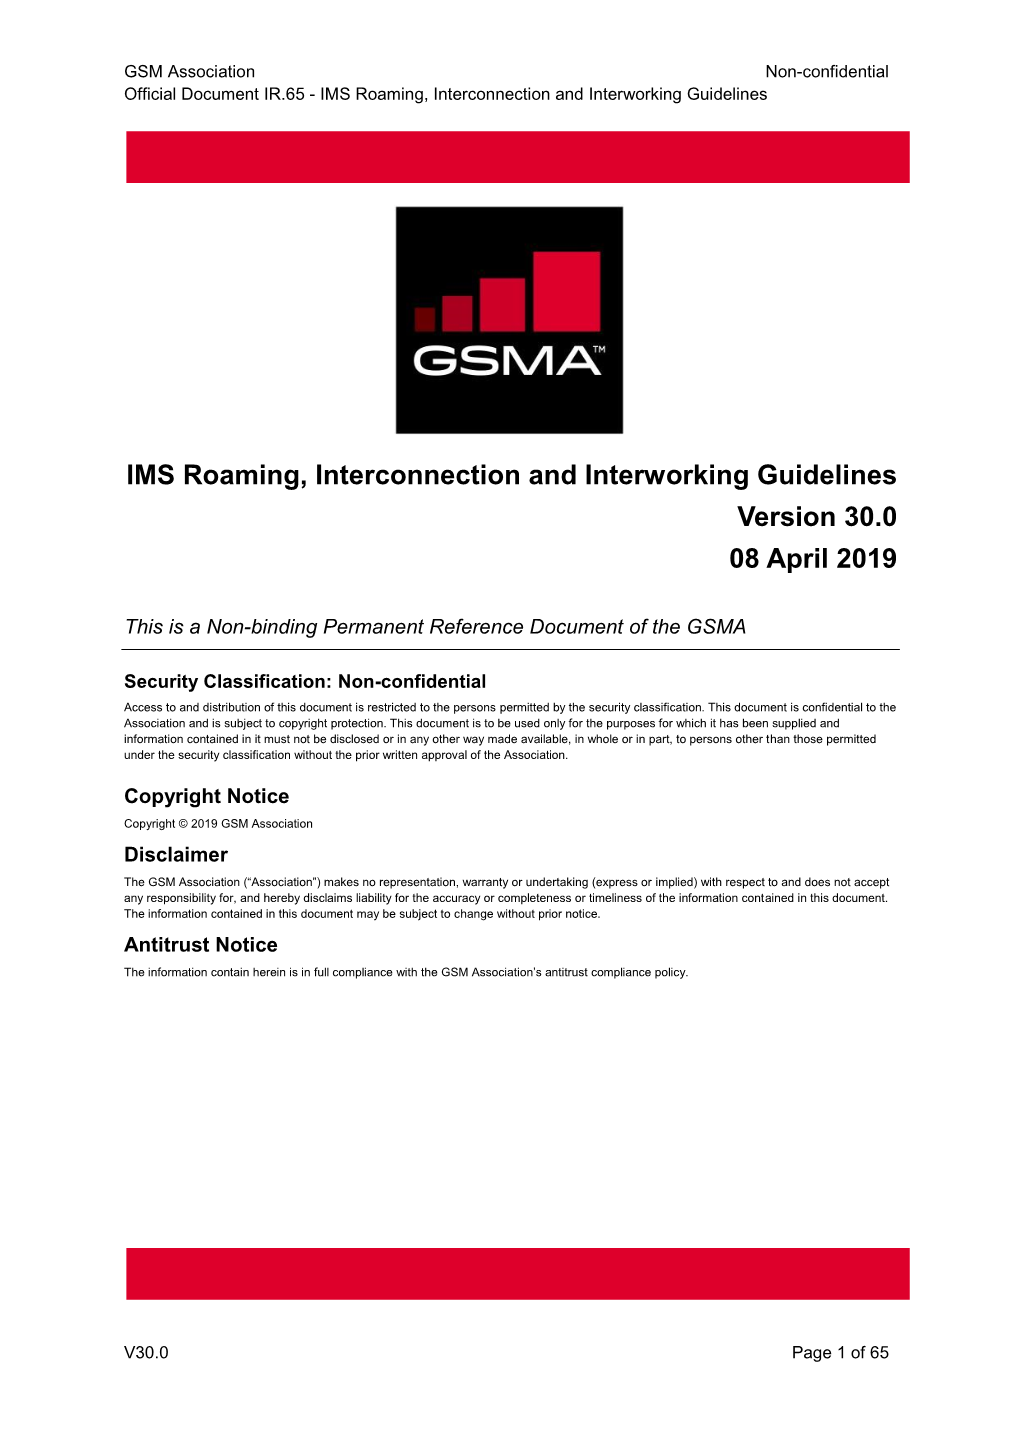 IMS Roaming, Interconnection and Interworking Guidelines Version 30.0 08 April 2019